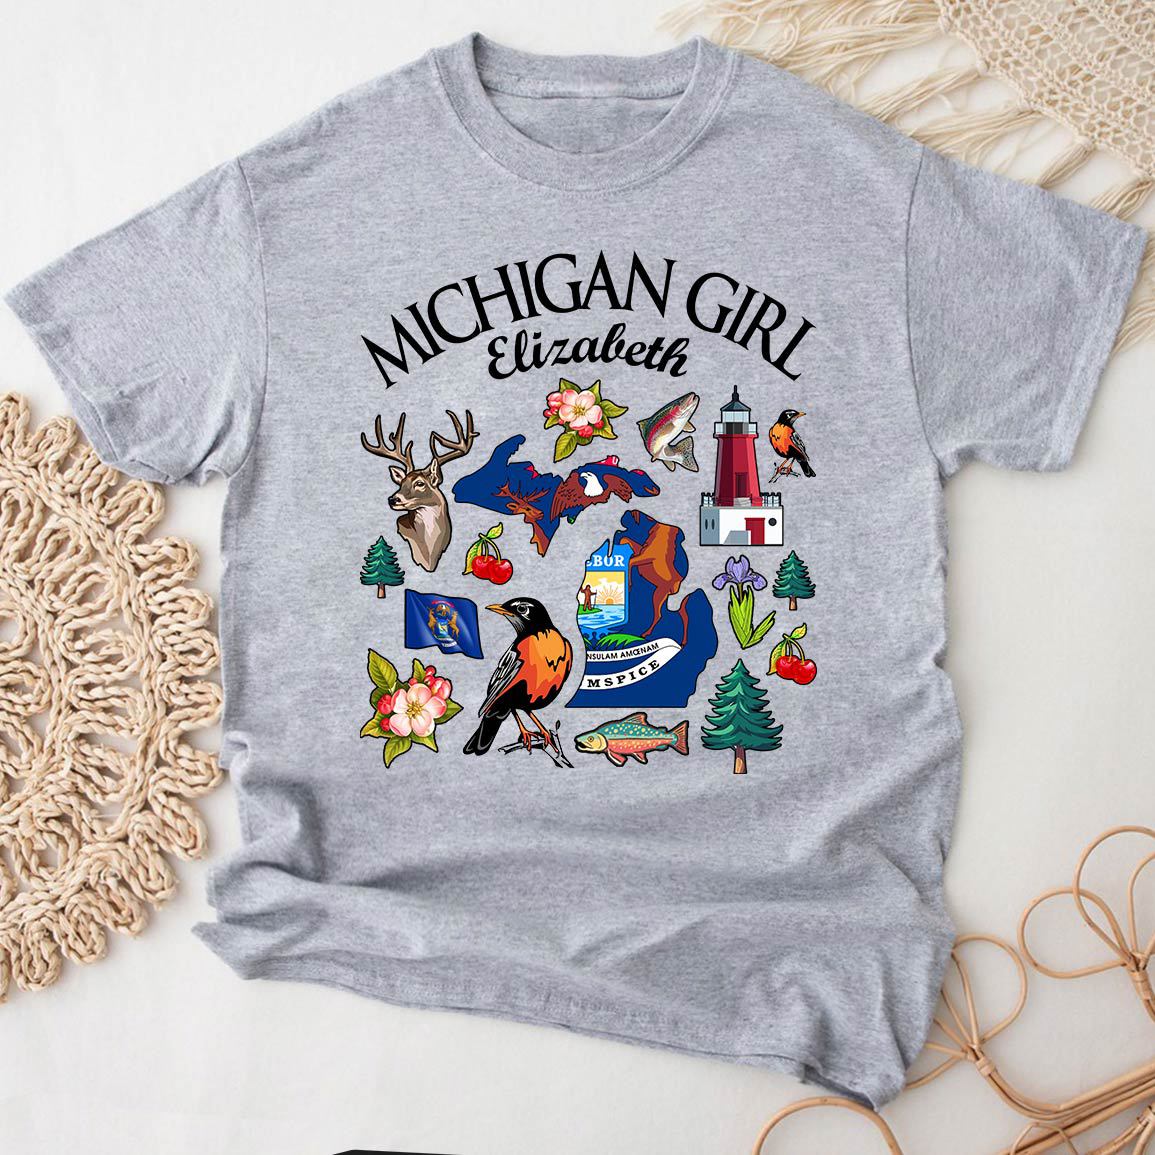 Customized Michigan Girl T-shirt With Symbols And Name